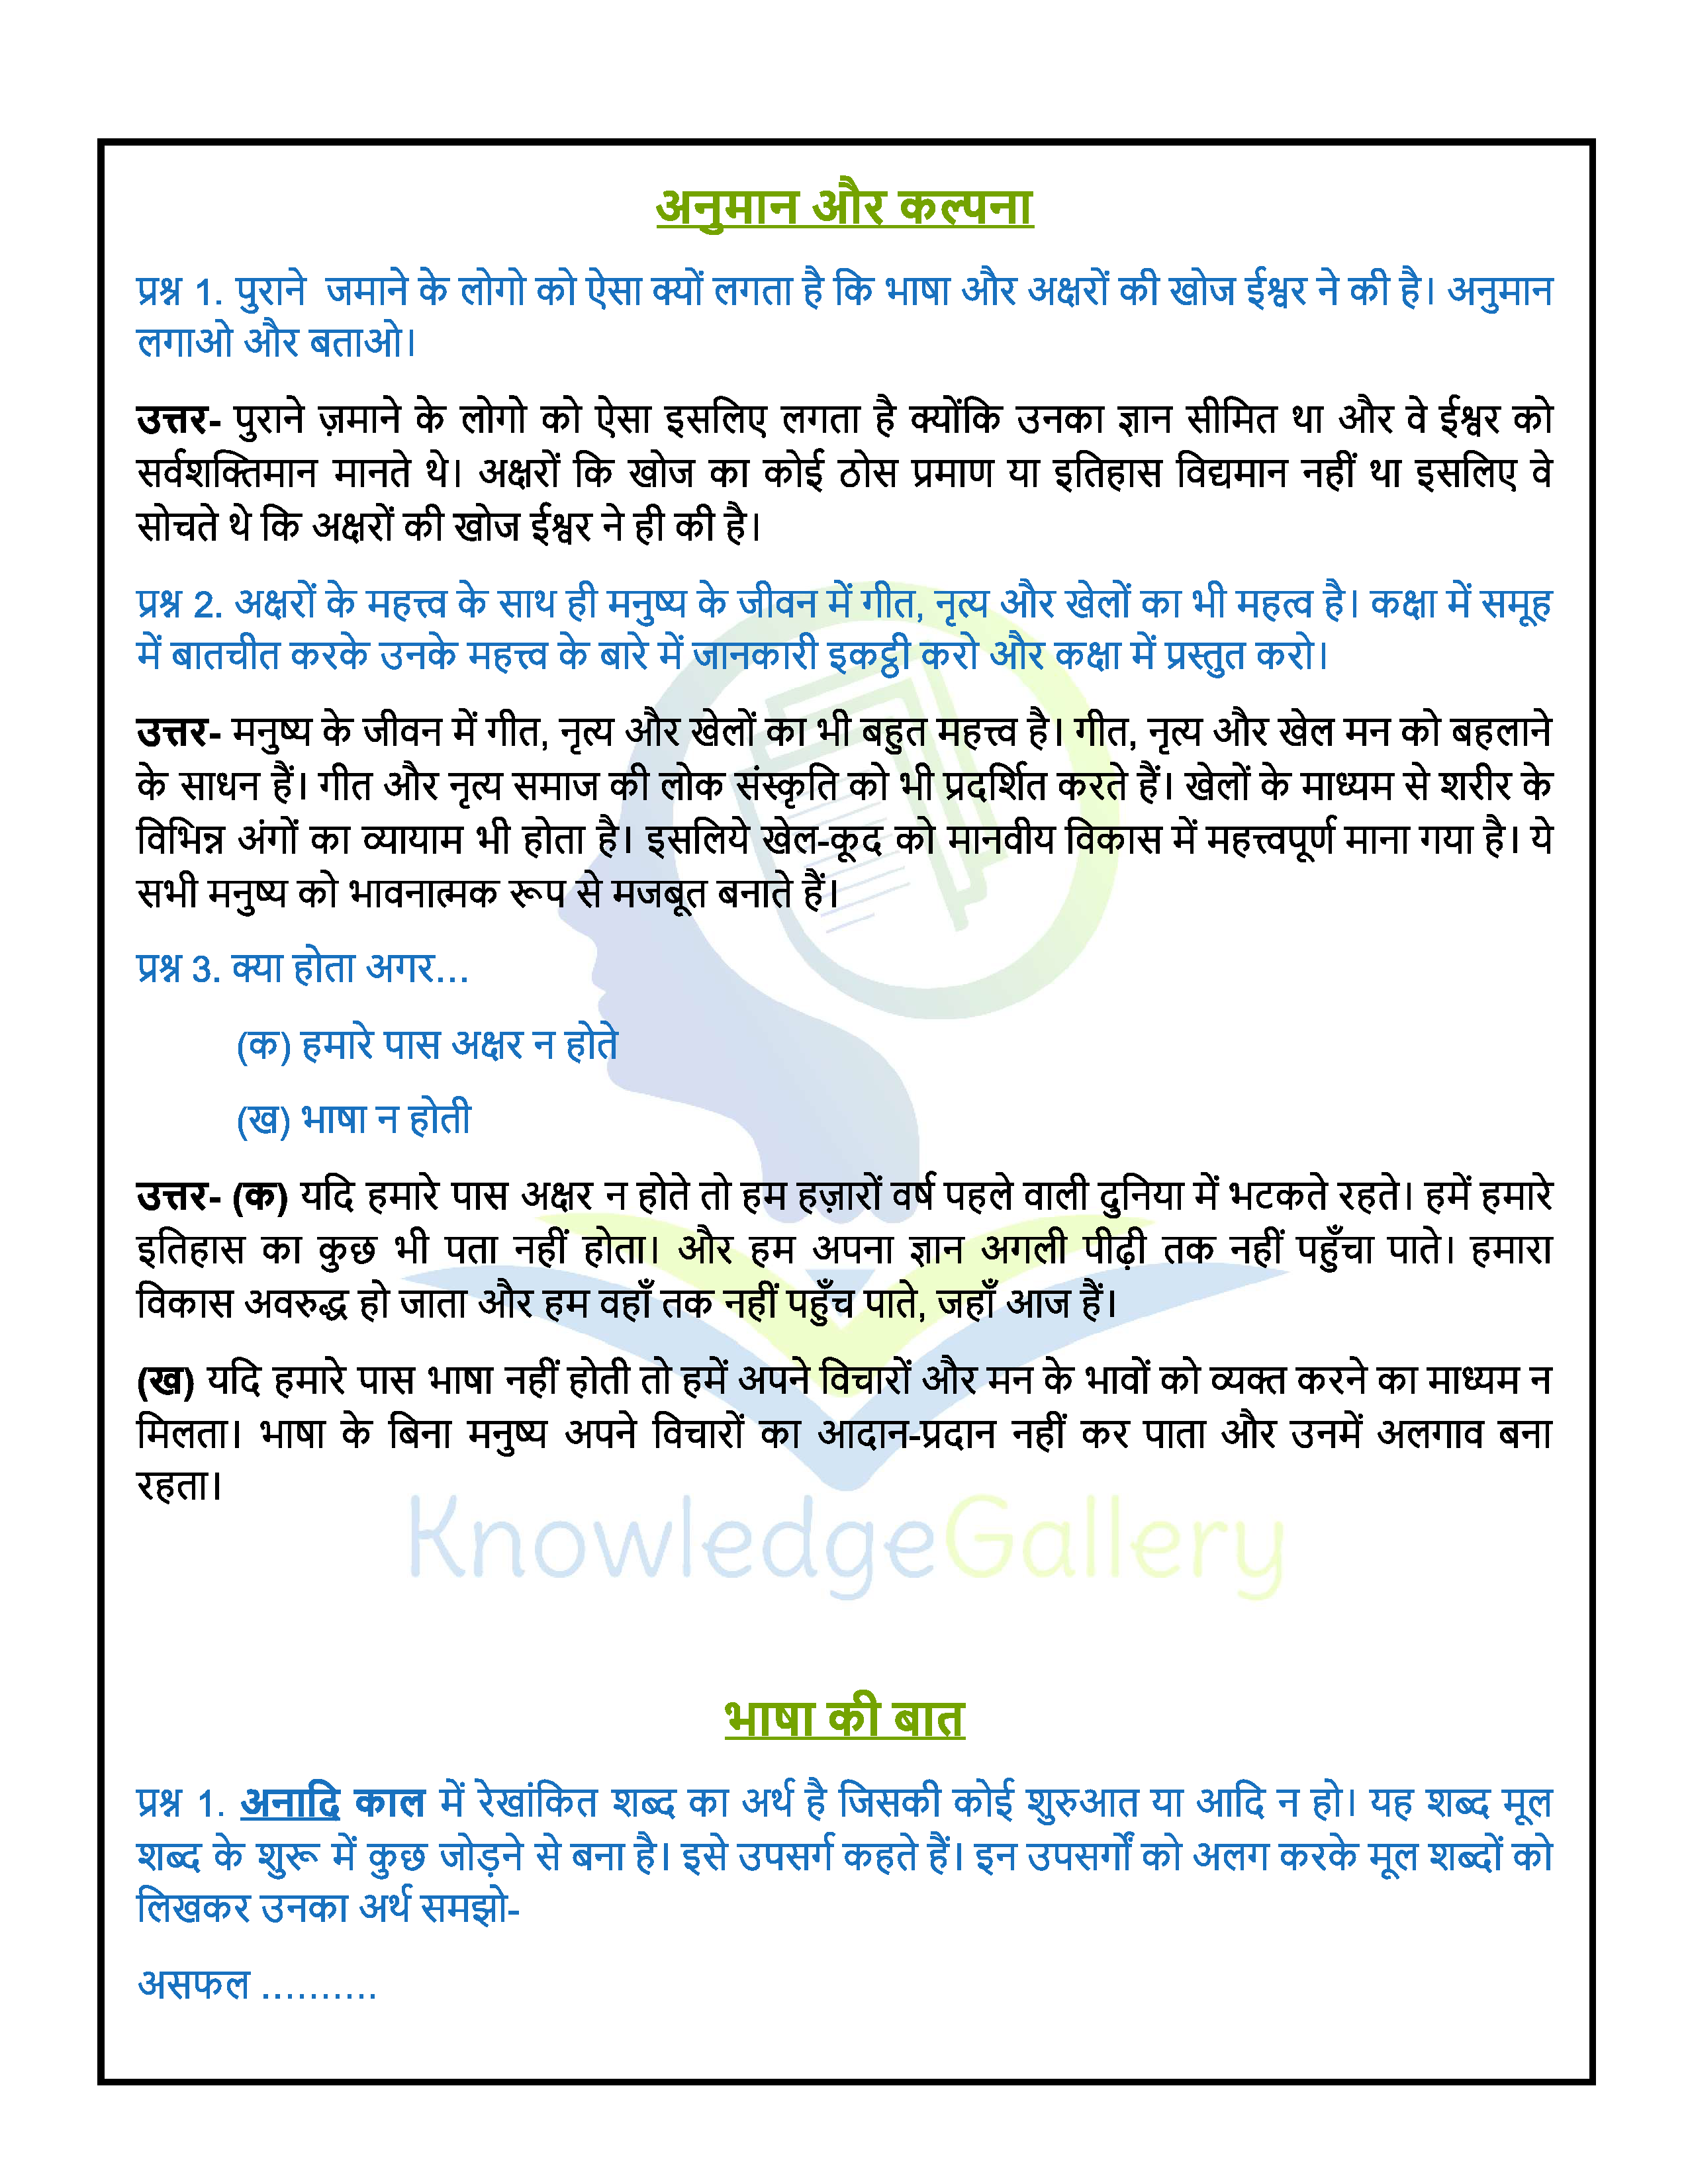 NCERT Solution For Class 6 Hindi Chapter 5 part 3